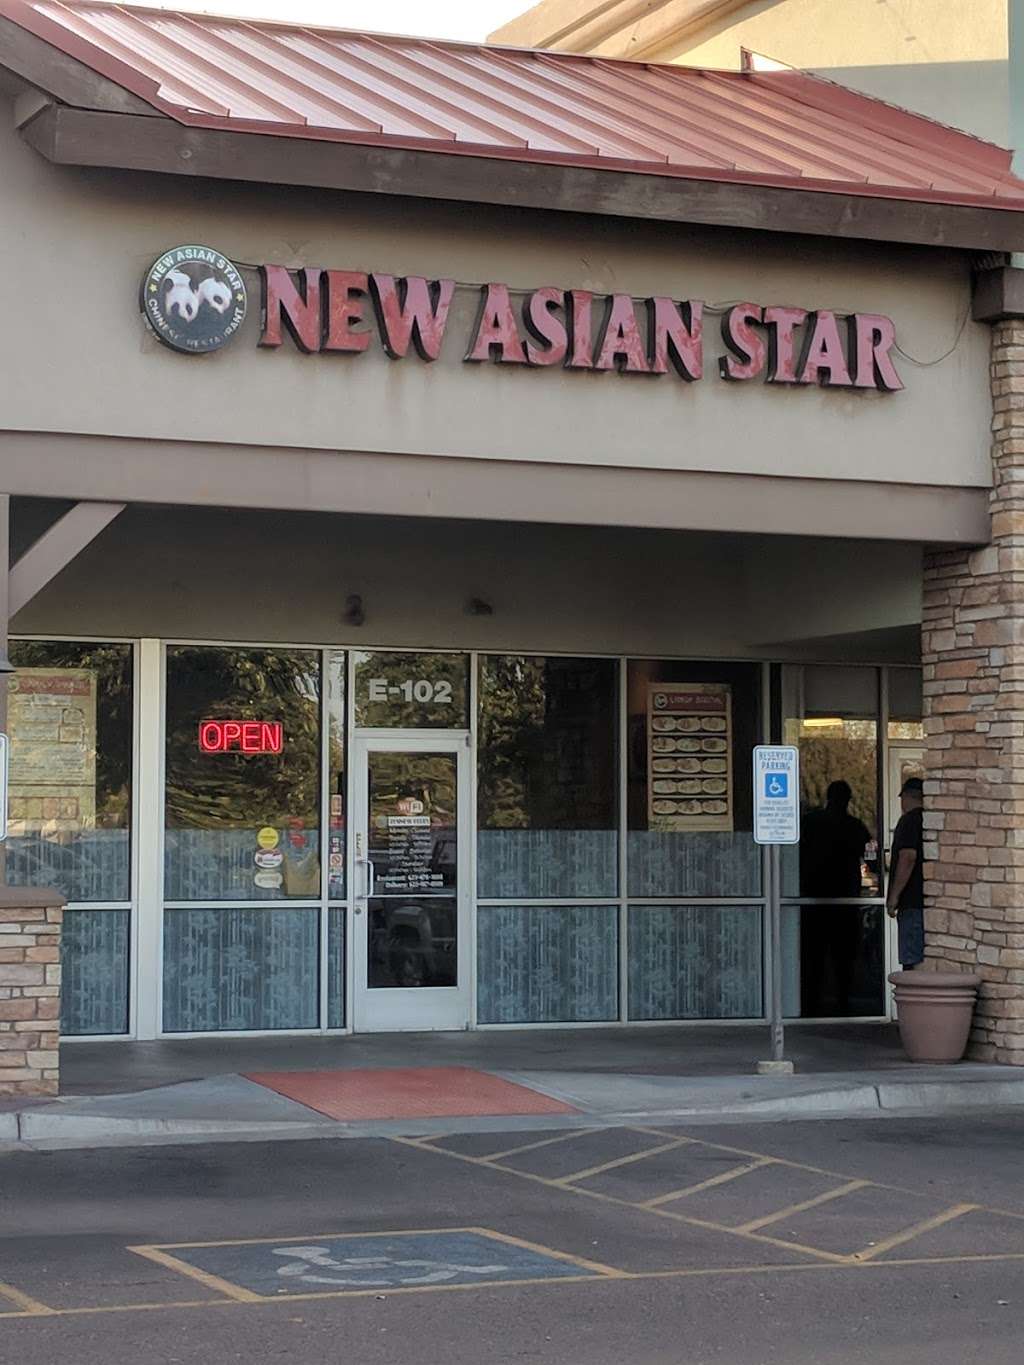 New Asian Star | 2755 S 99th Ave suite e-102, Tolleson, AZ 85353 | Phone: (623) 907-8000